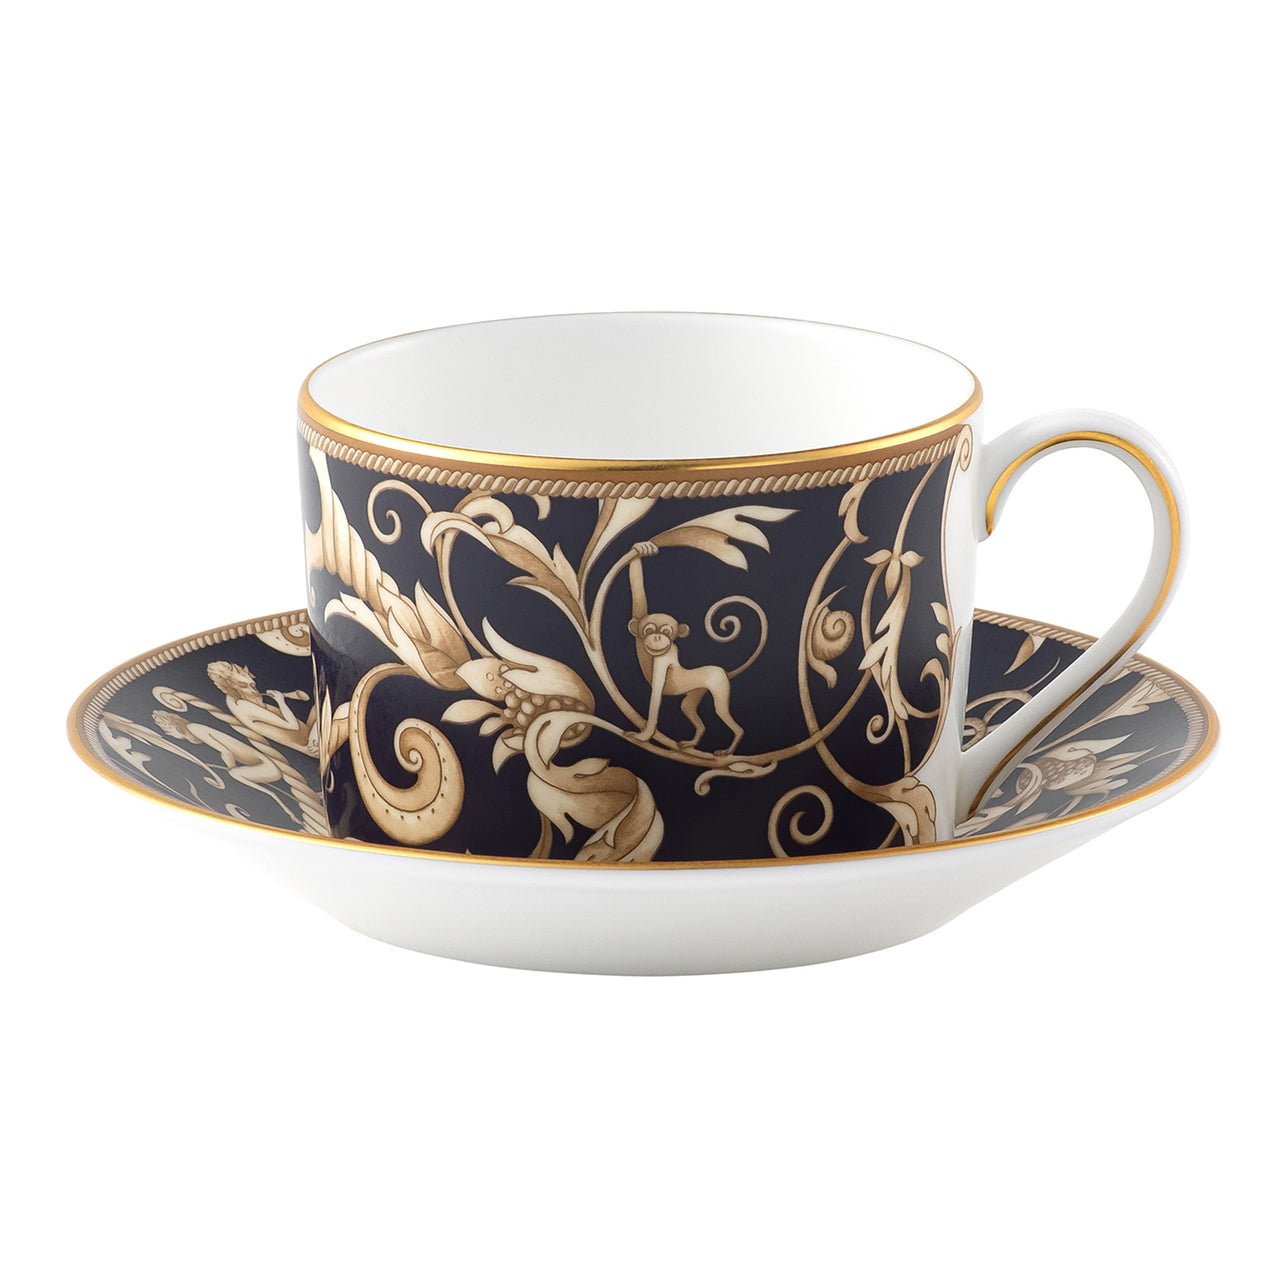 Wedgwood Cornucopia Teacup & Saucer  Make a bold style statement at your morning coffee or afternoon tea break with this Cornucopia Accent Teacup. Perfect when paired with the tea saucer, this duo makes a stylish gift for a loved one (or for yourself). 